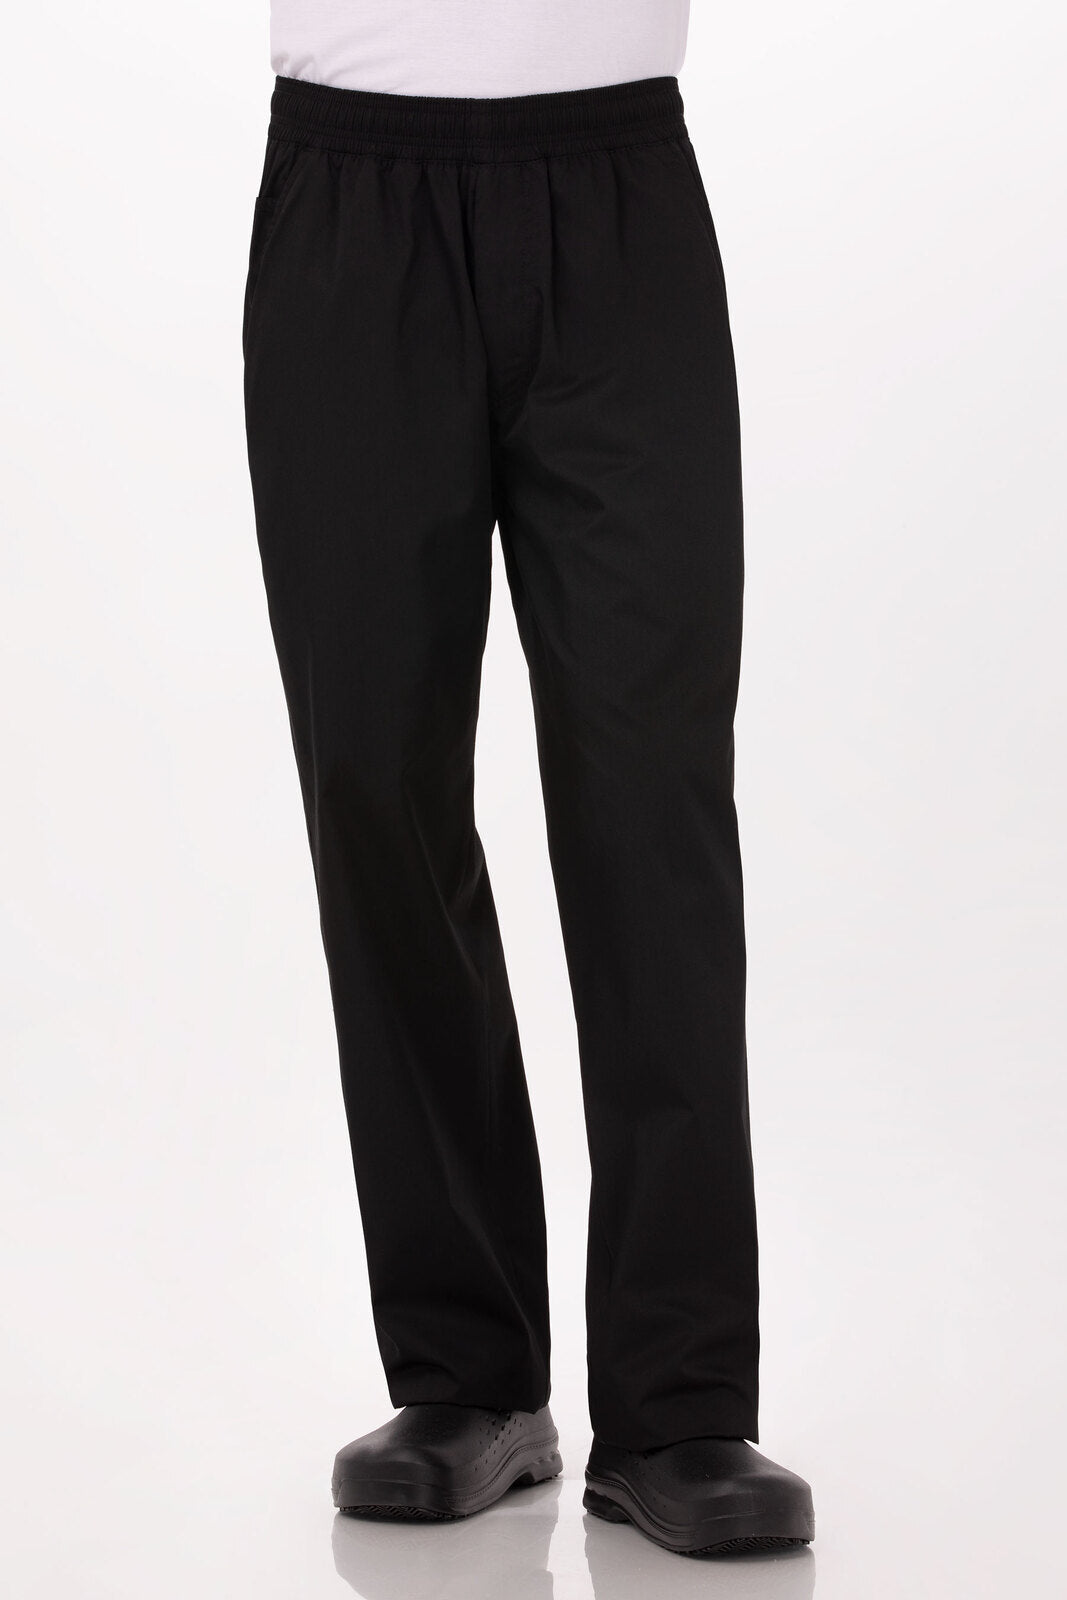 Chef Works Lightweight Baggy Pants - (BBLW)